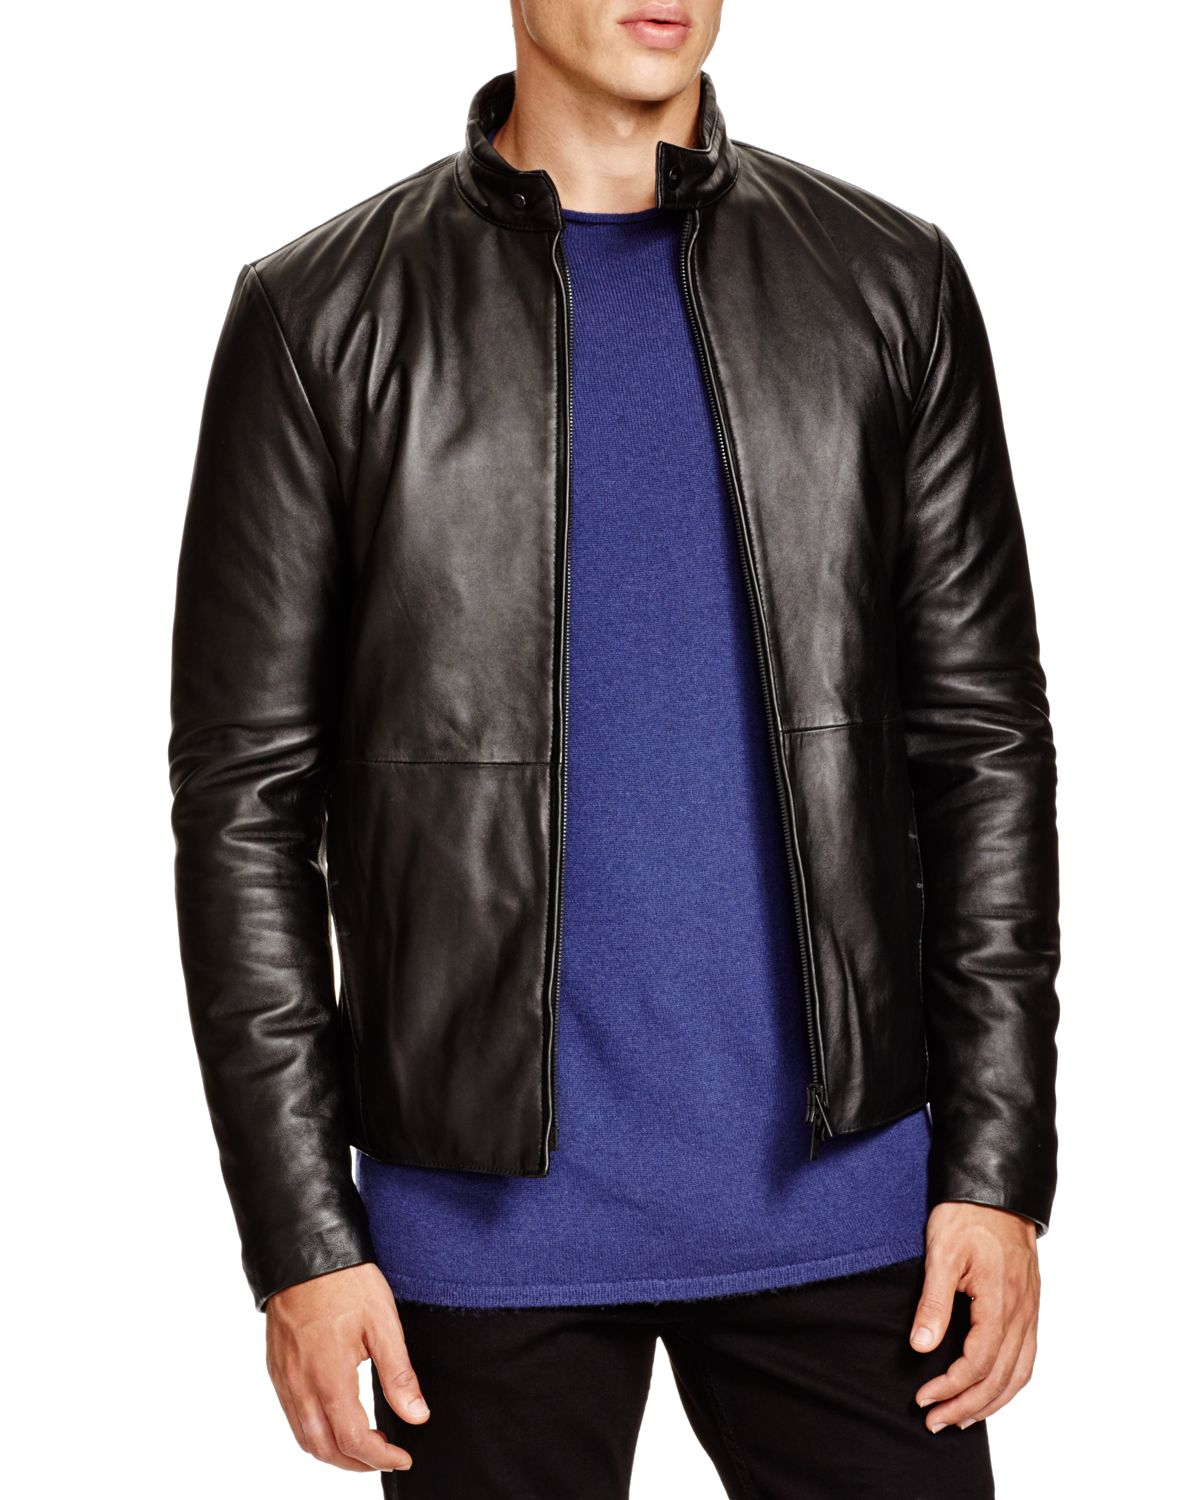 Lyst - Armani High Neck Leather Jacket in Black for Men